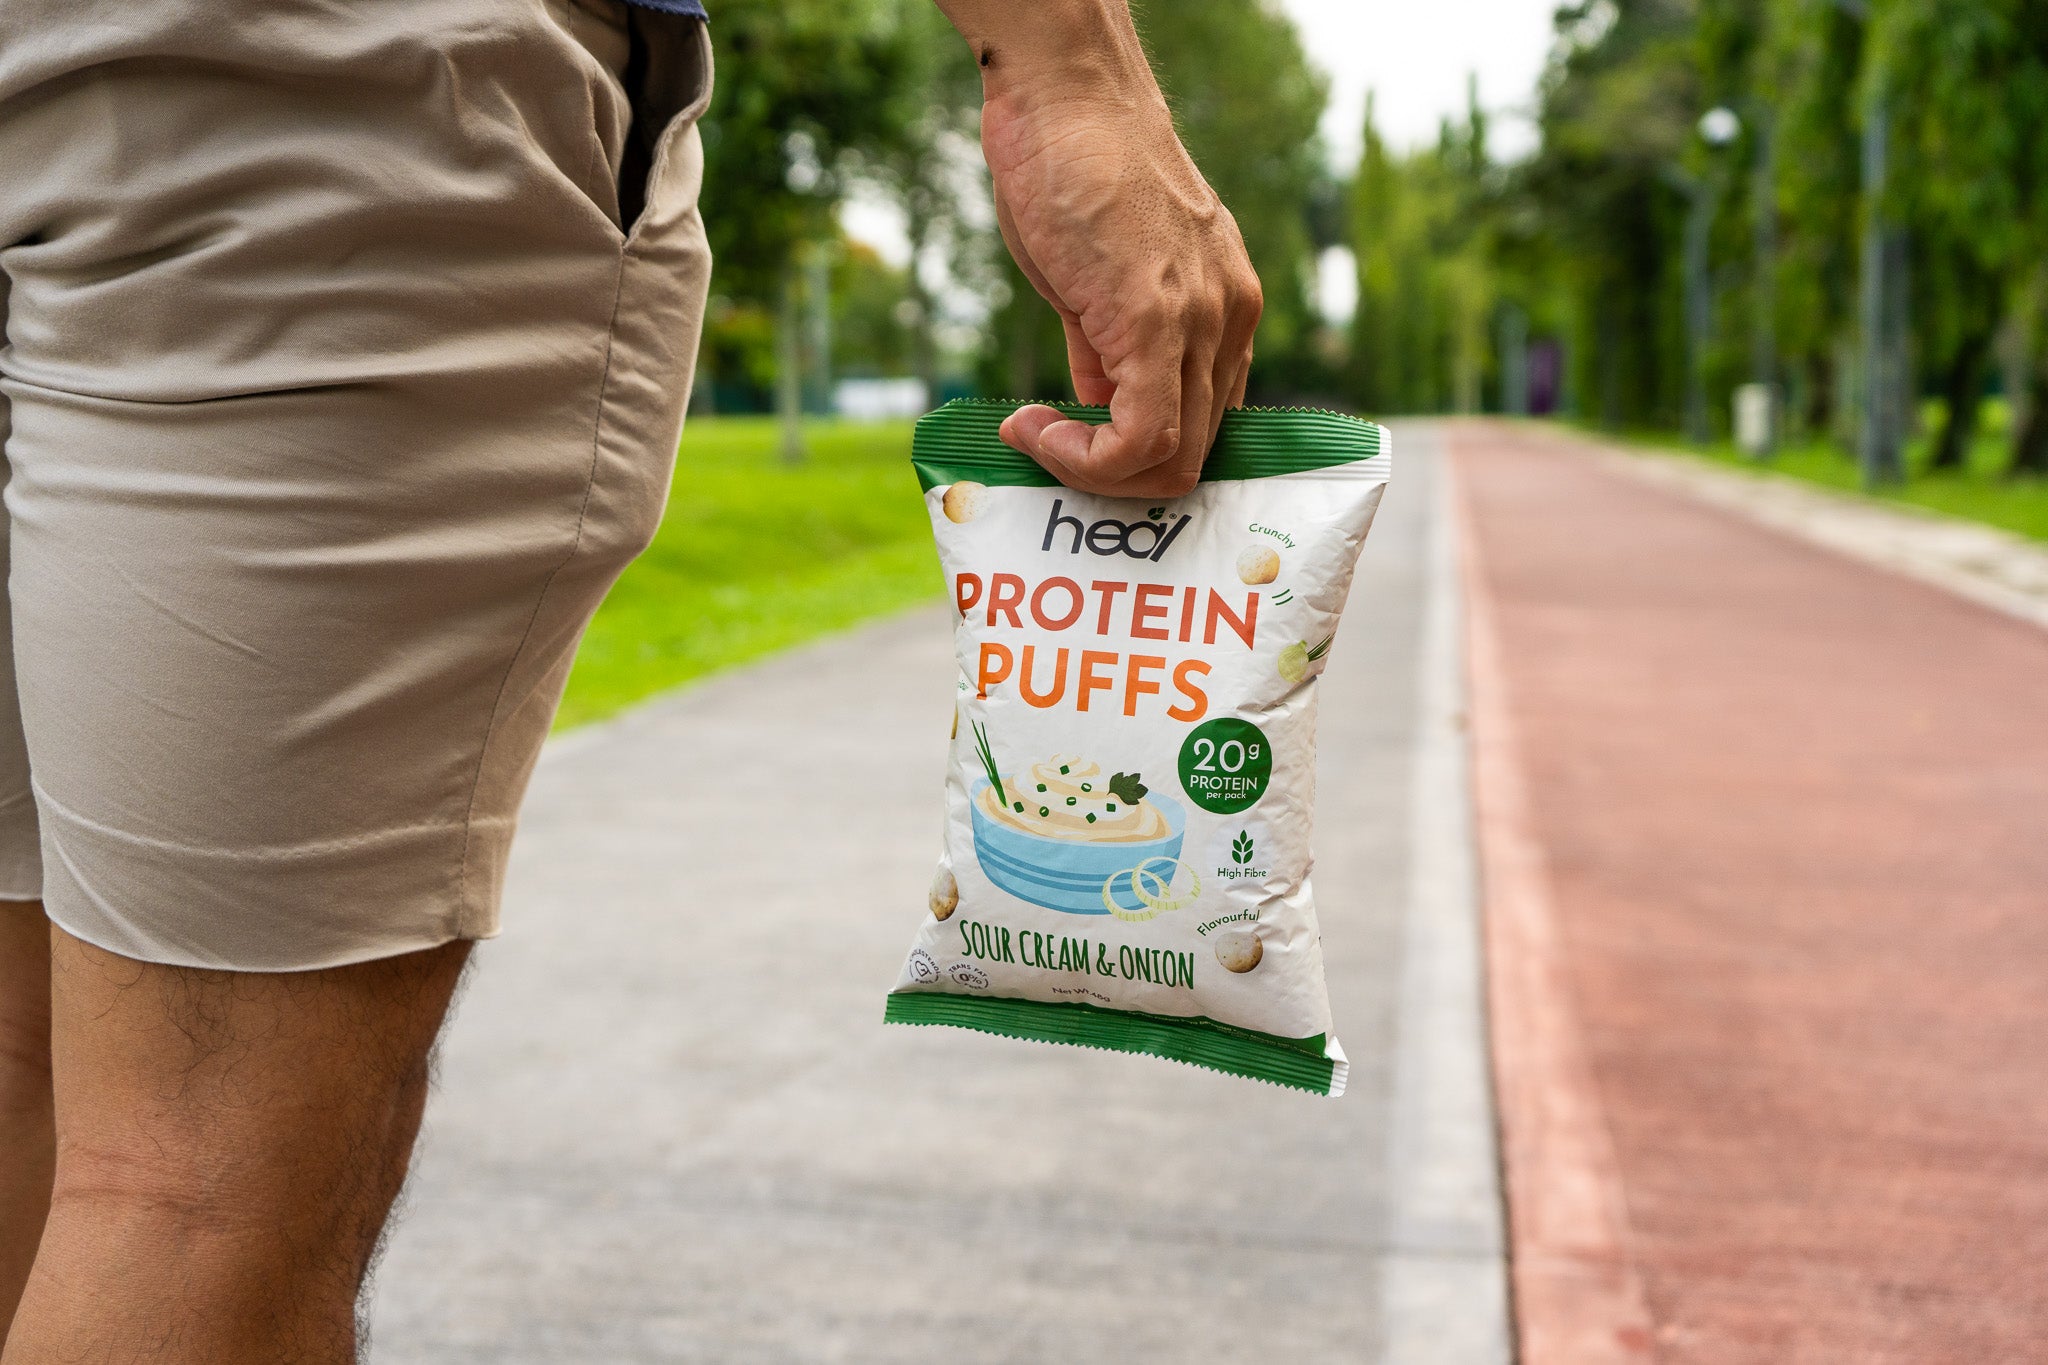 Heal Protein Puffs Sour Cream & Onion (48g) - Creamy Crunch with High-Protein High-Fibre: Guilt-Free Snacking for Muscle Growth and Gut Health Indulgence